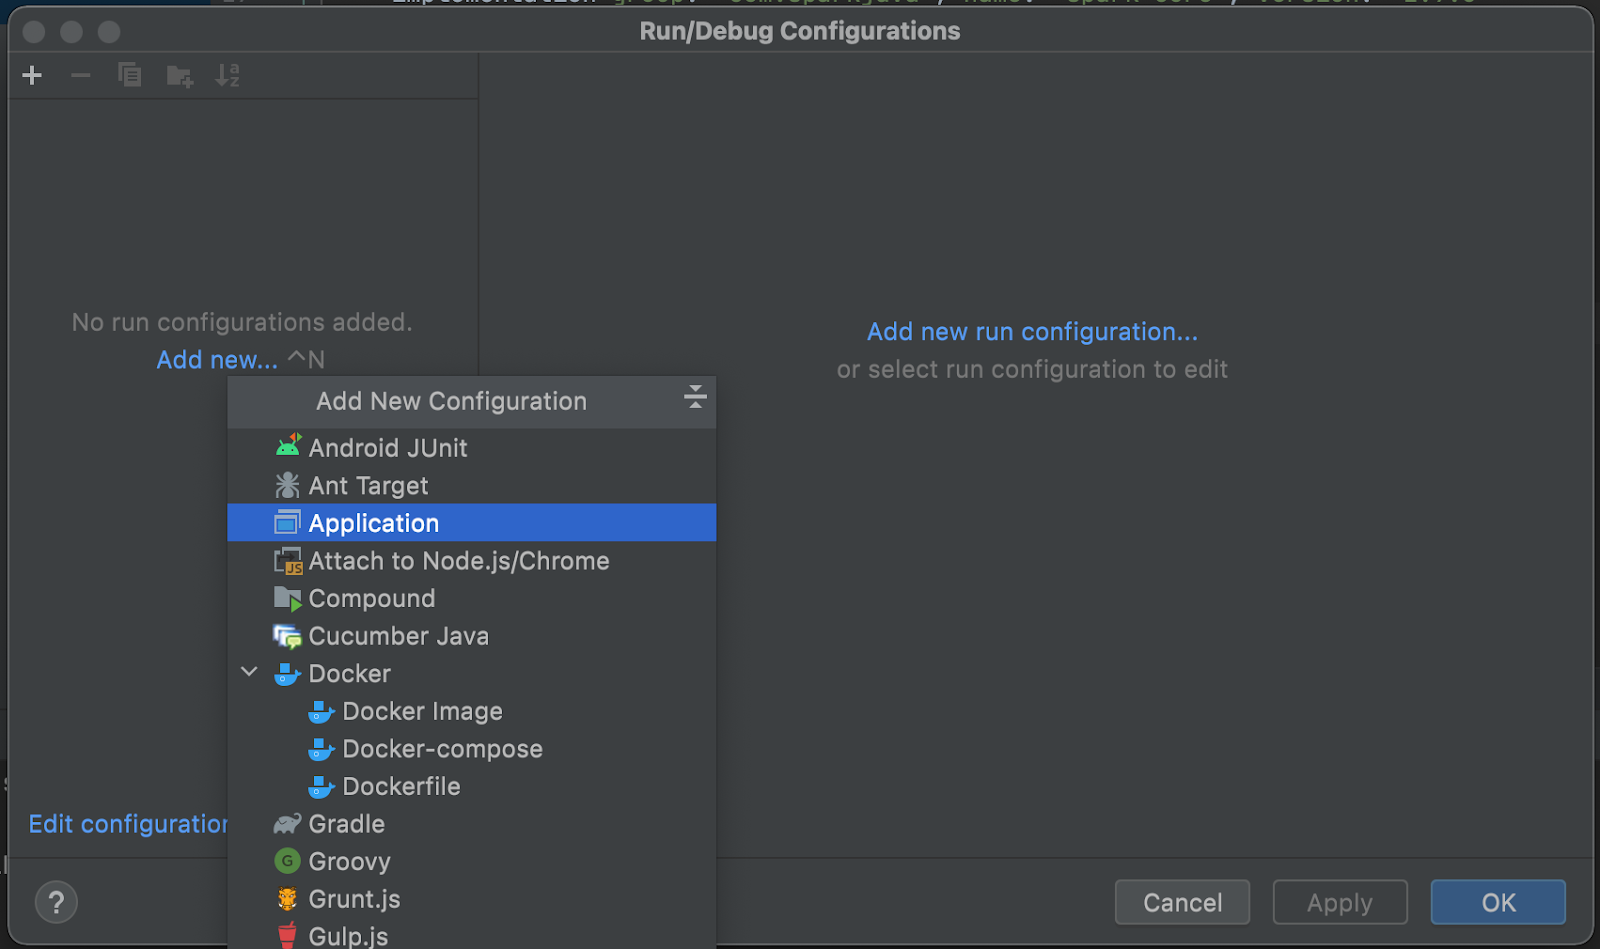 option to add a new application to edit configurations in intellij idea